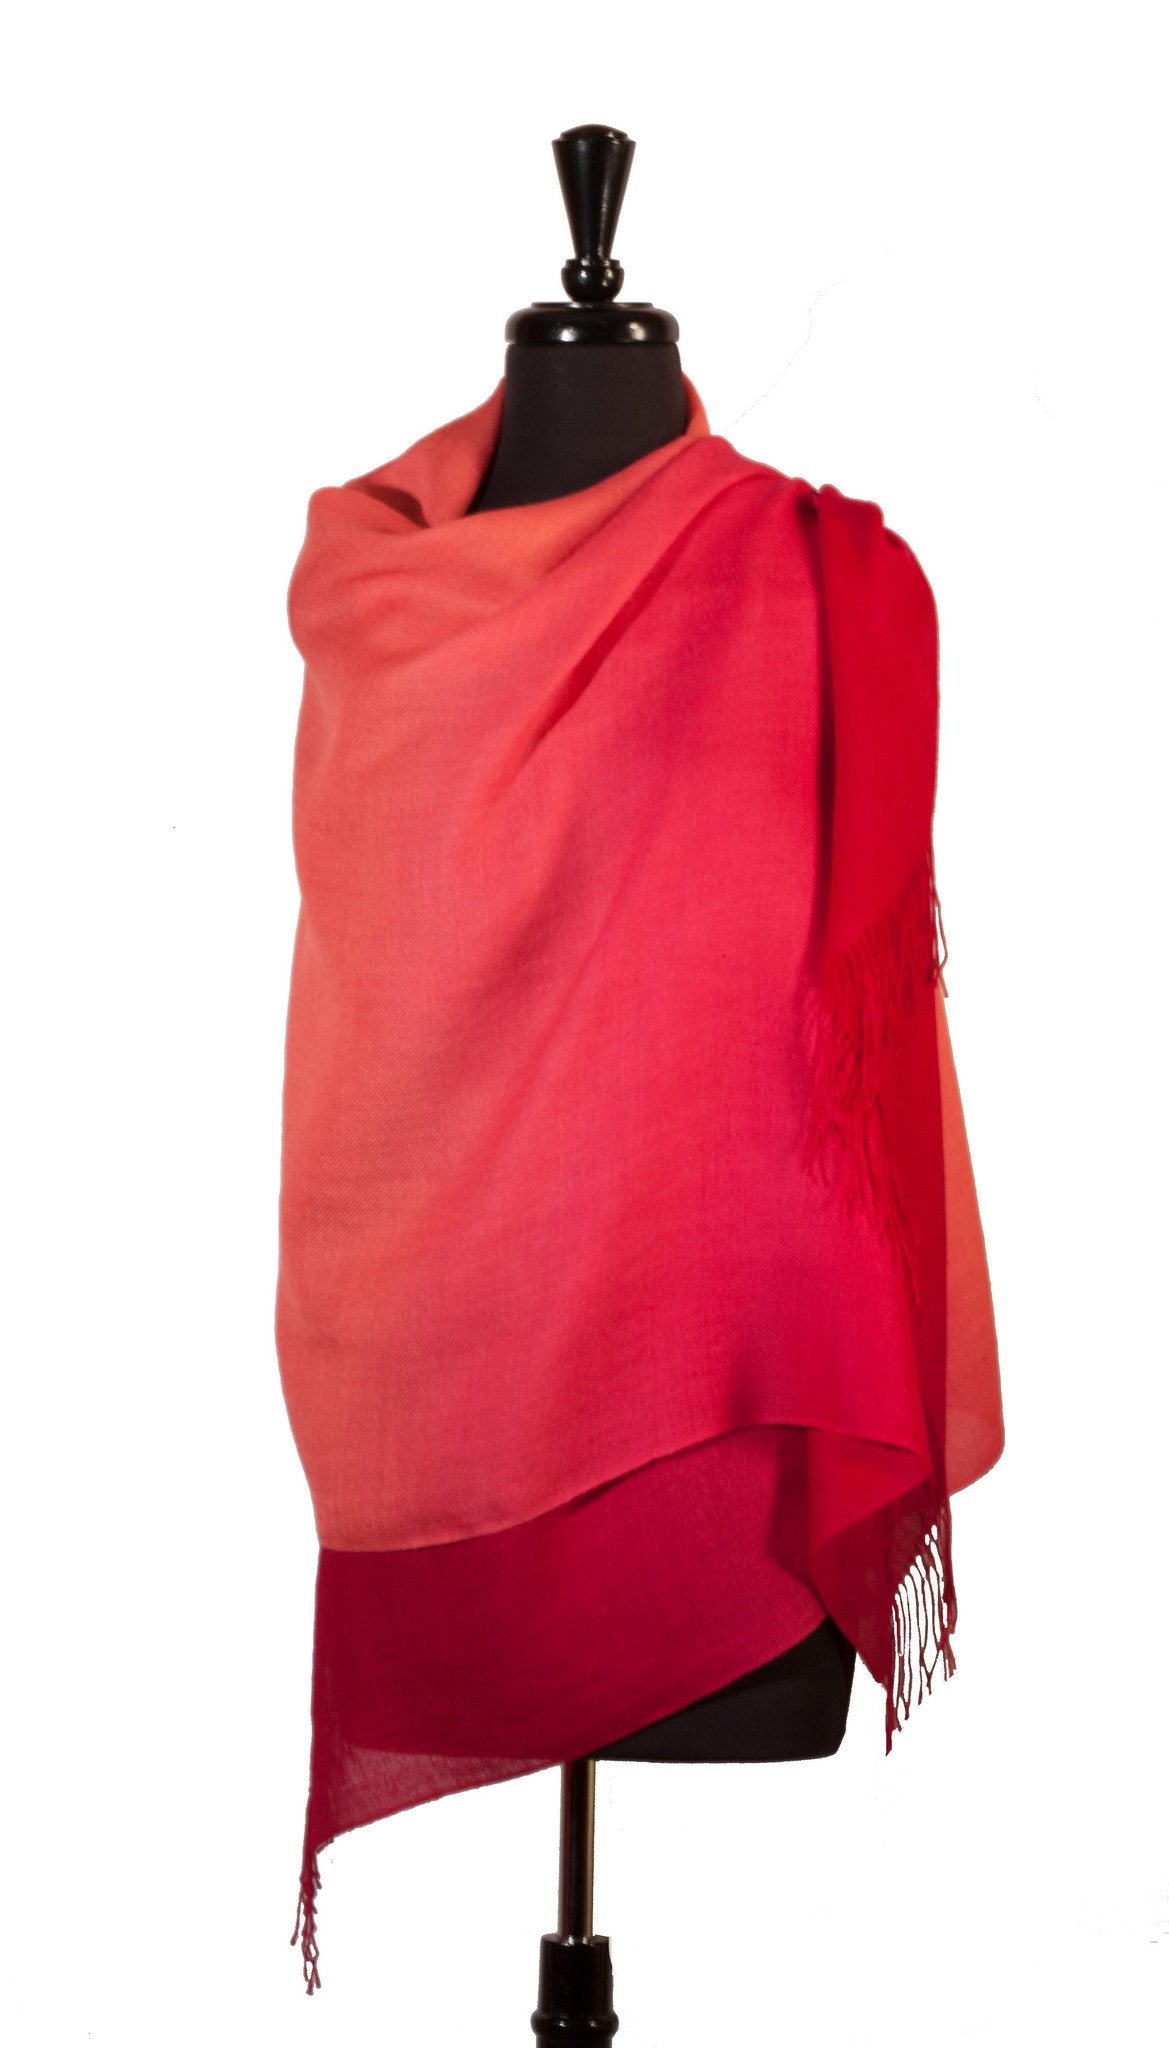 Baby Alpaca & Silk Shawl Two-toned Degrade - Dip Dyed in Coral - Qinti - The Peruvian Shop